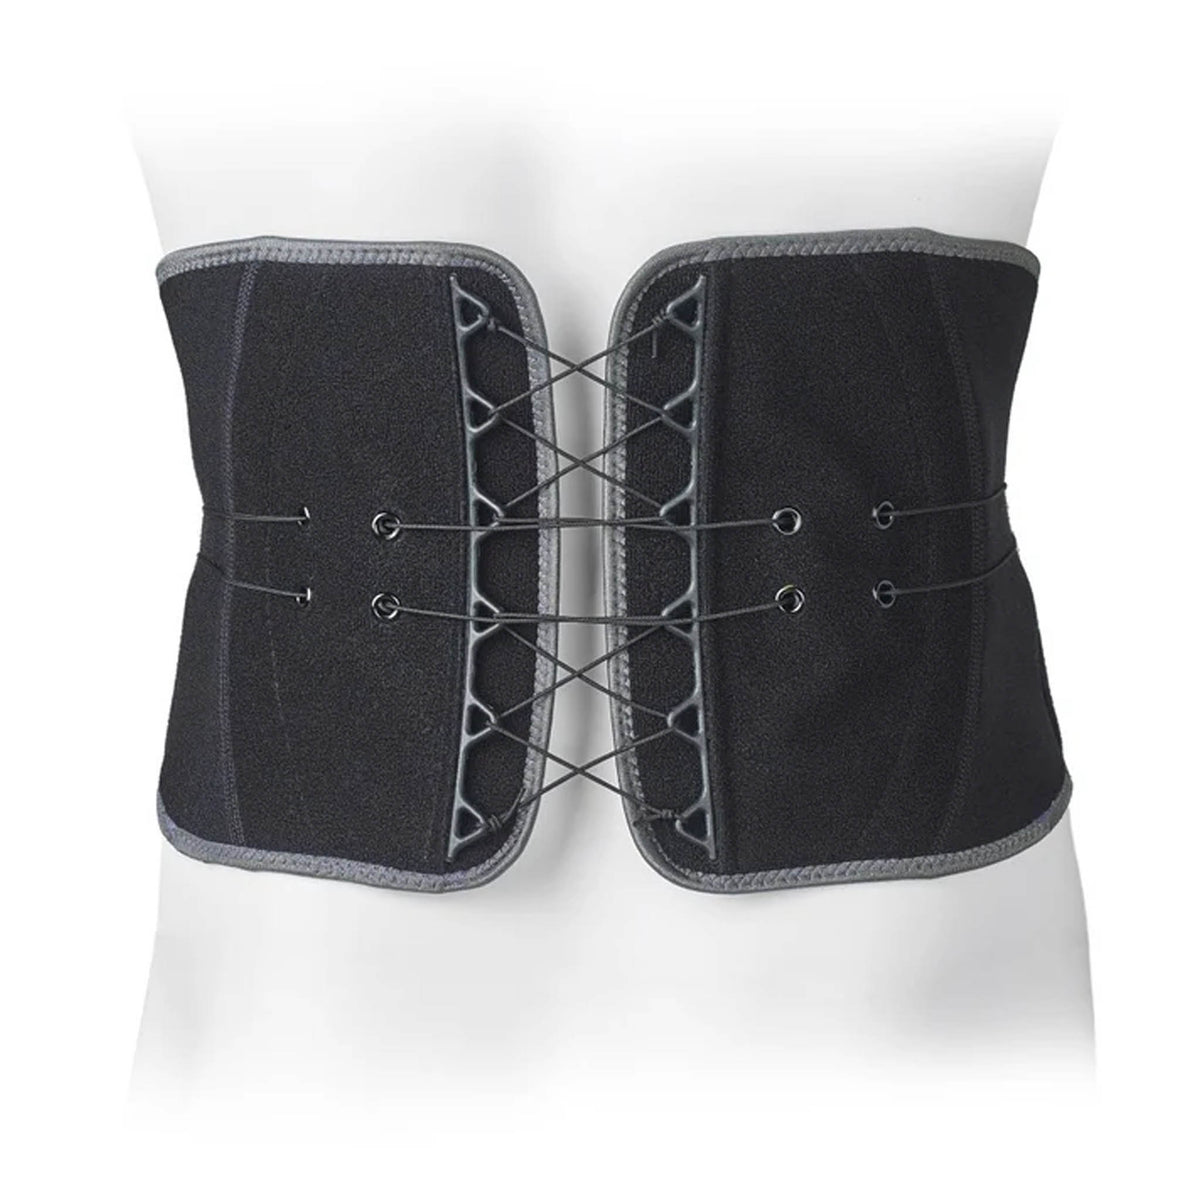 Ultimate Performance Advanced Back Support